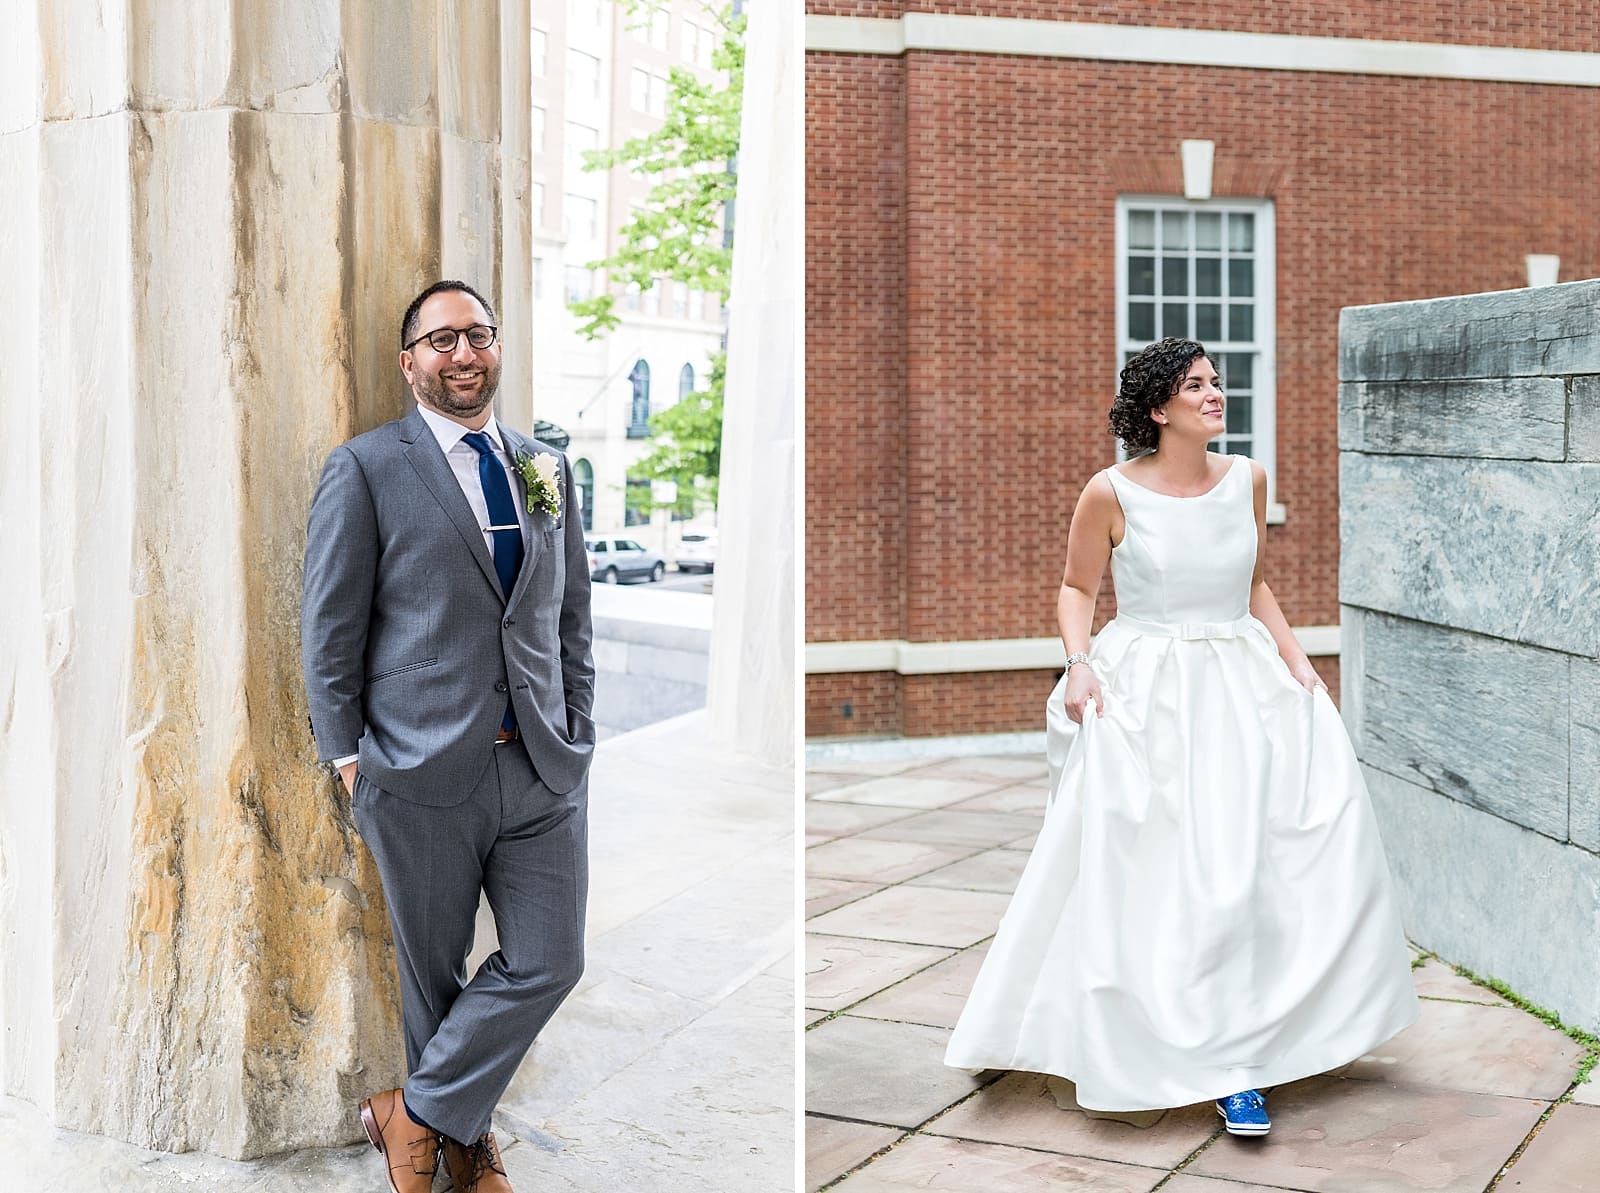 Bride & groom prepare for first look at Philadelphia's Second National Bank